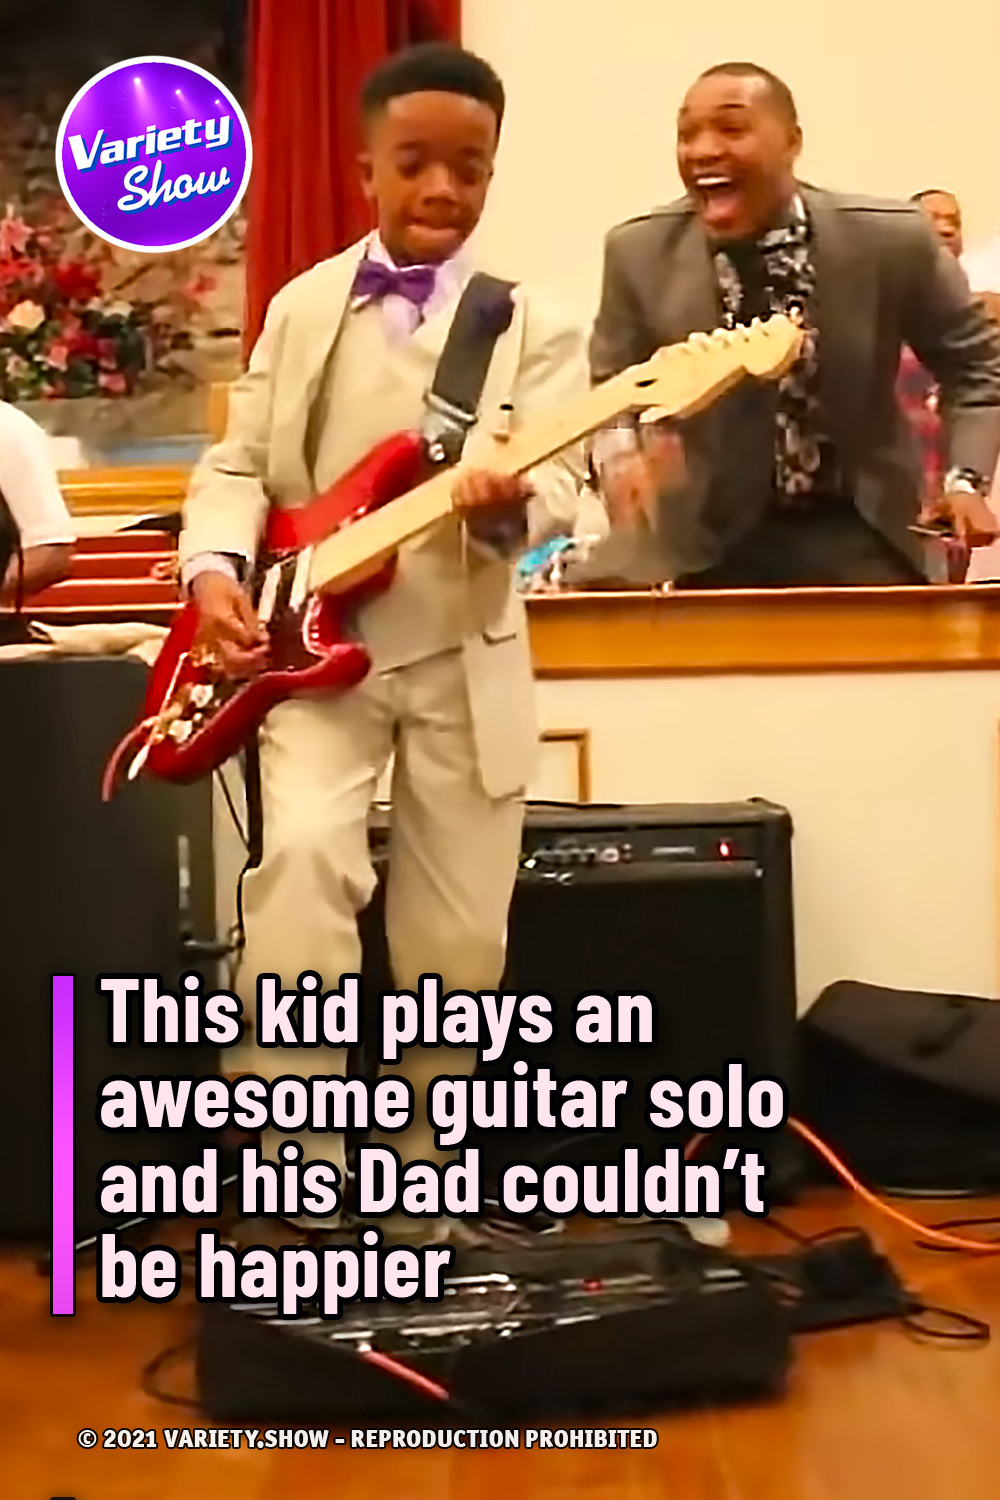 This kid plays an awesome guitar solo and his Dad couldn’t be happier